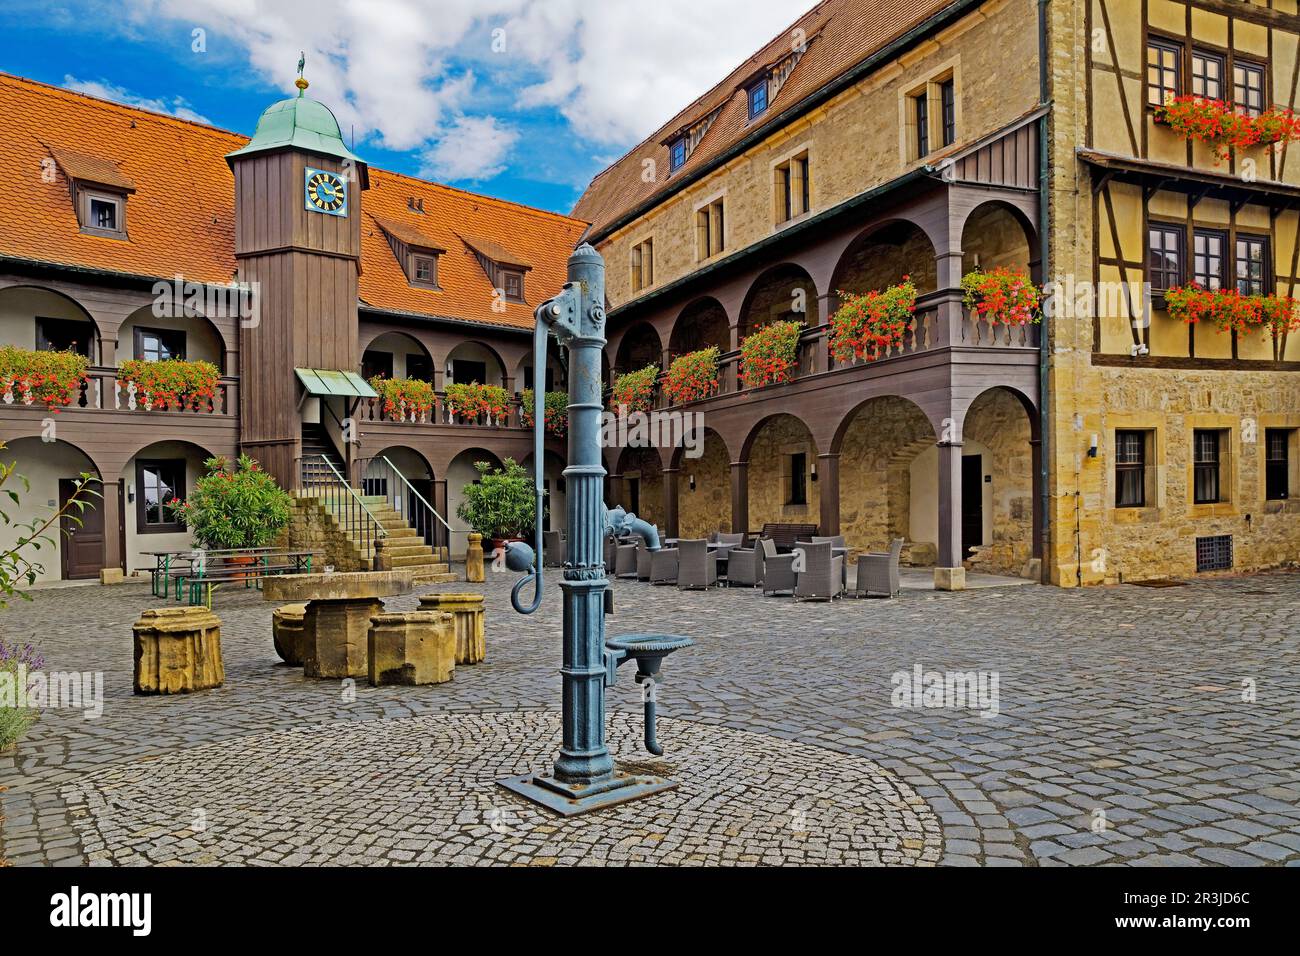 Portico house in the Augustinian monastery where Martin Luther lived, Erfurt, Germany, Europe Stock Photo